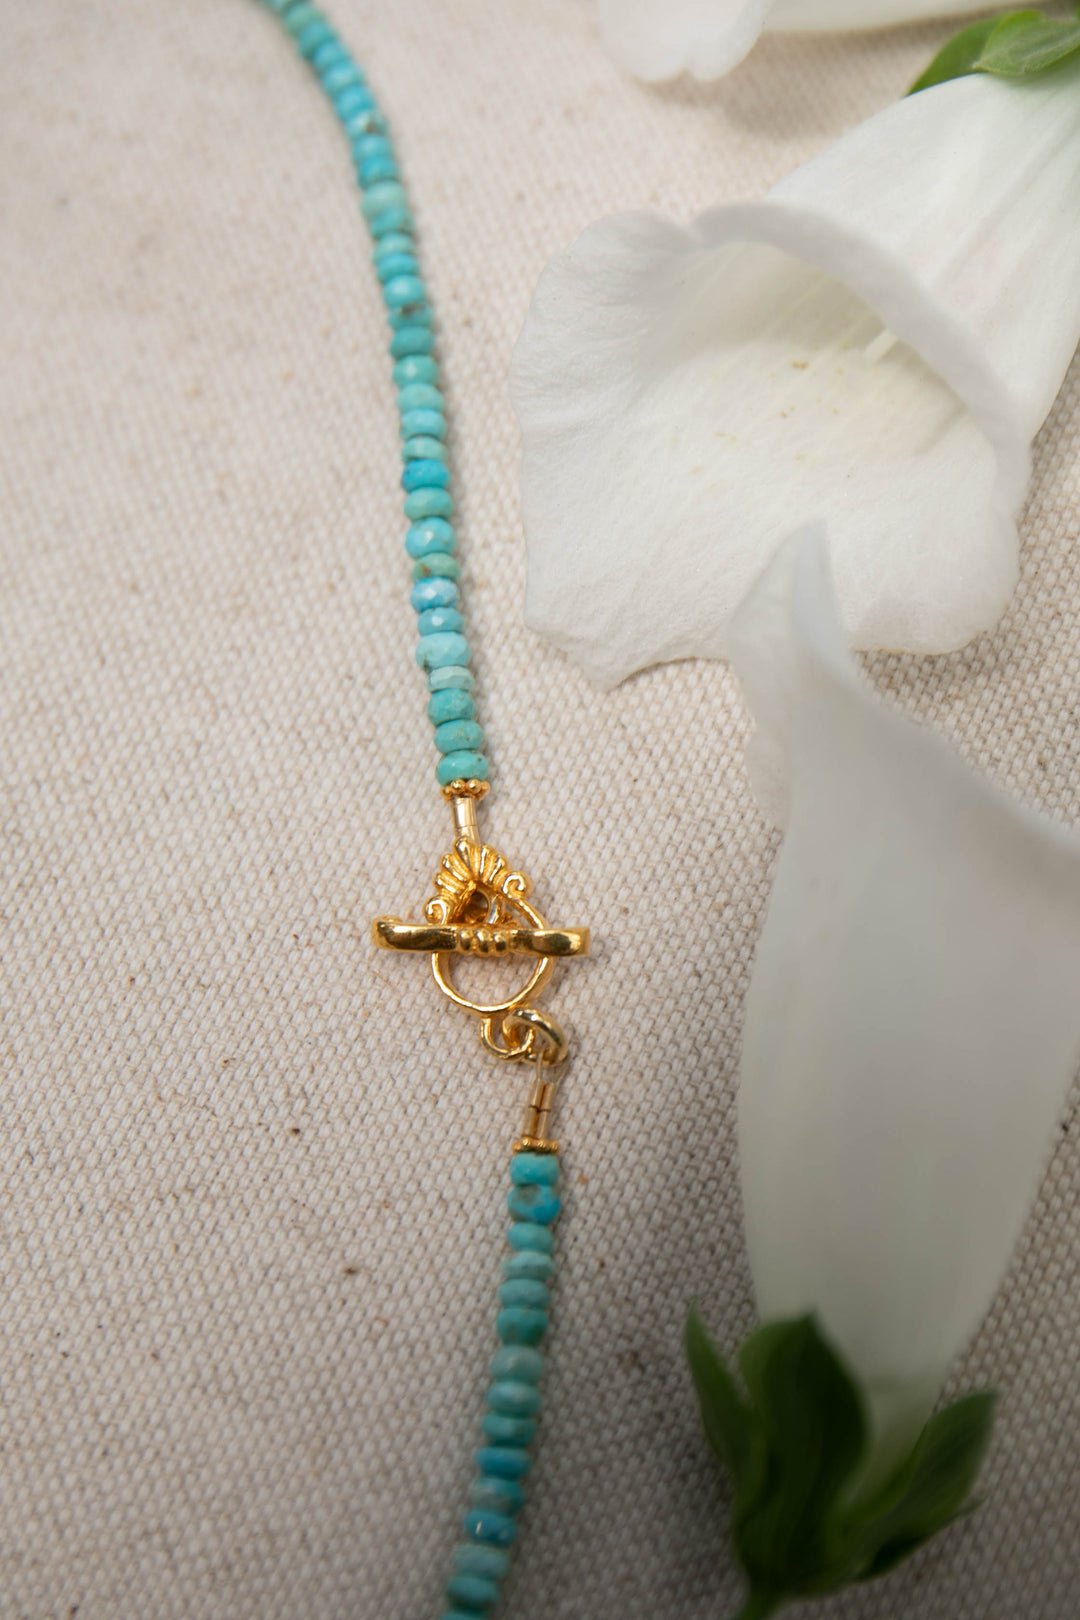 Reserved for Senta*** Arizona Turquoise and Gold Vermeil Choker Necklace